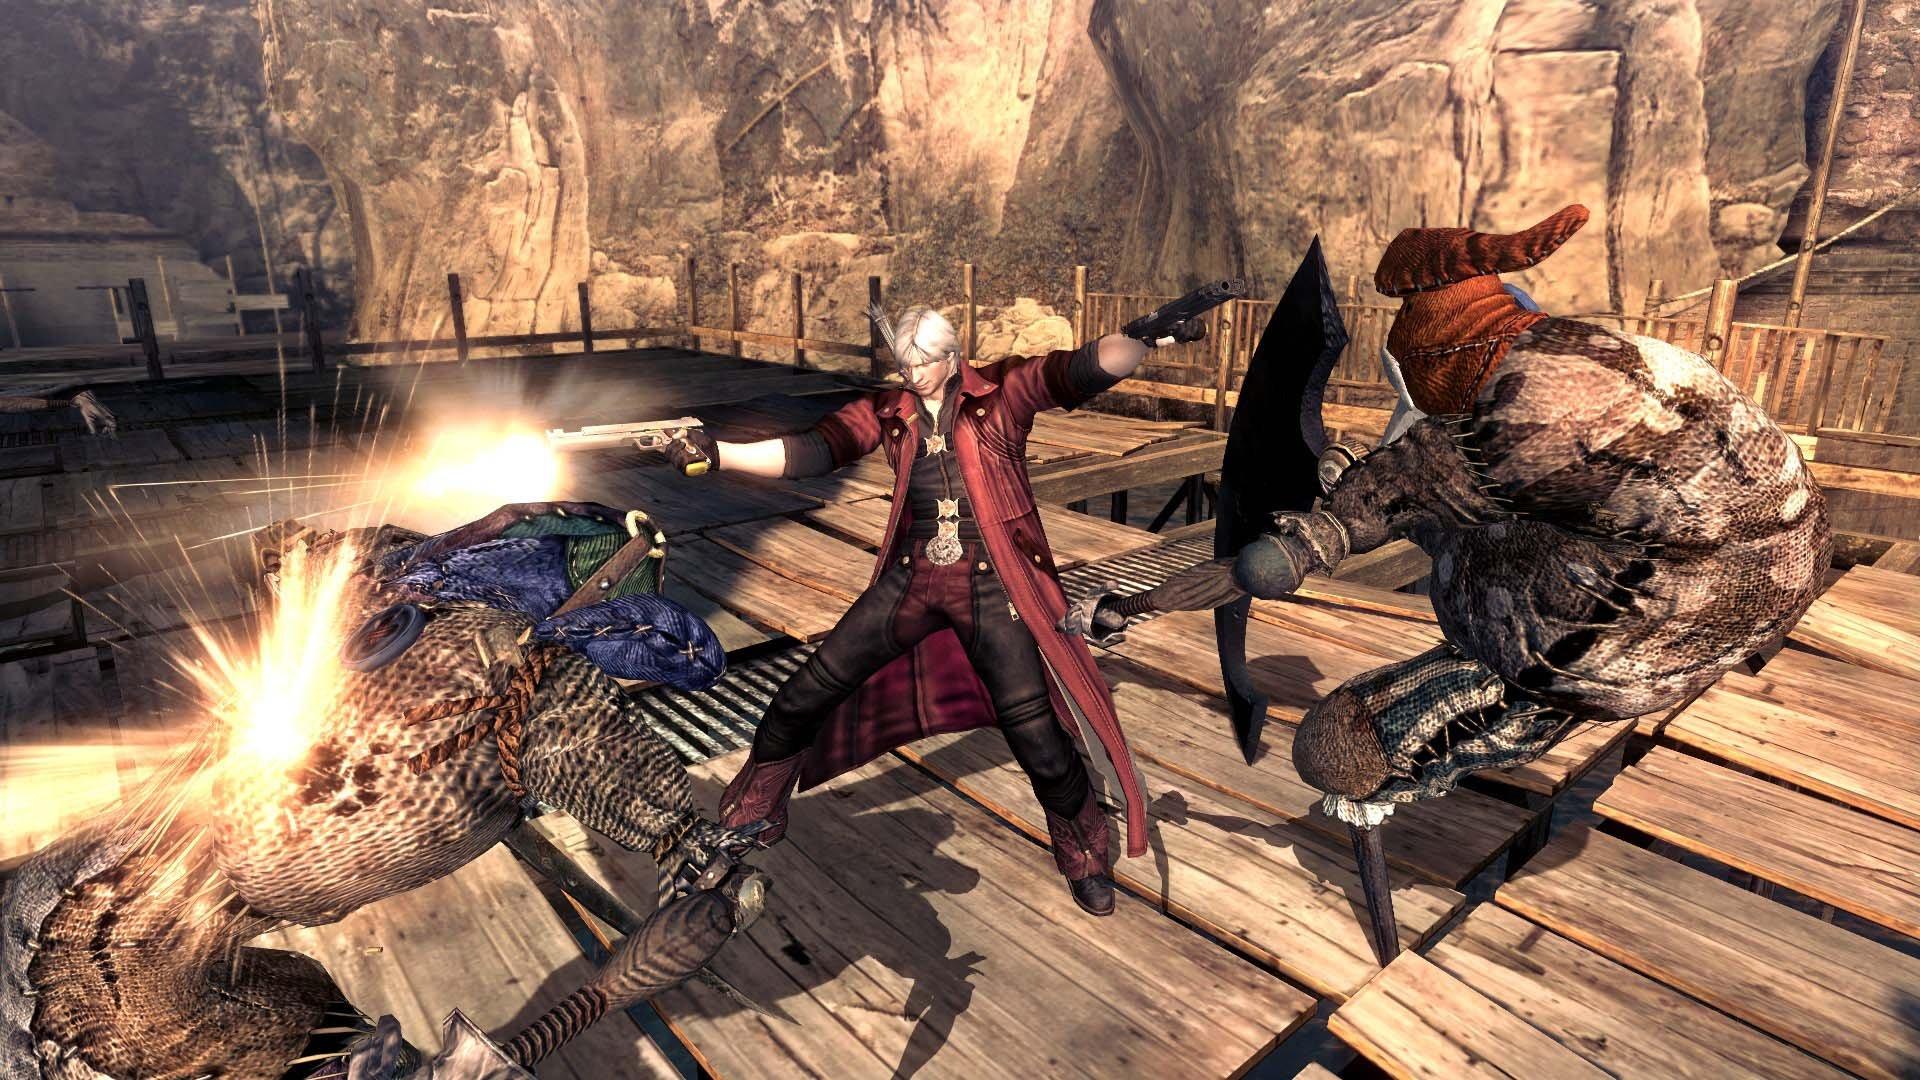 Review: Devil May Cry 4 Special Edition